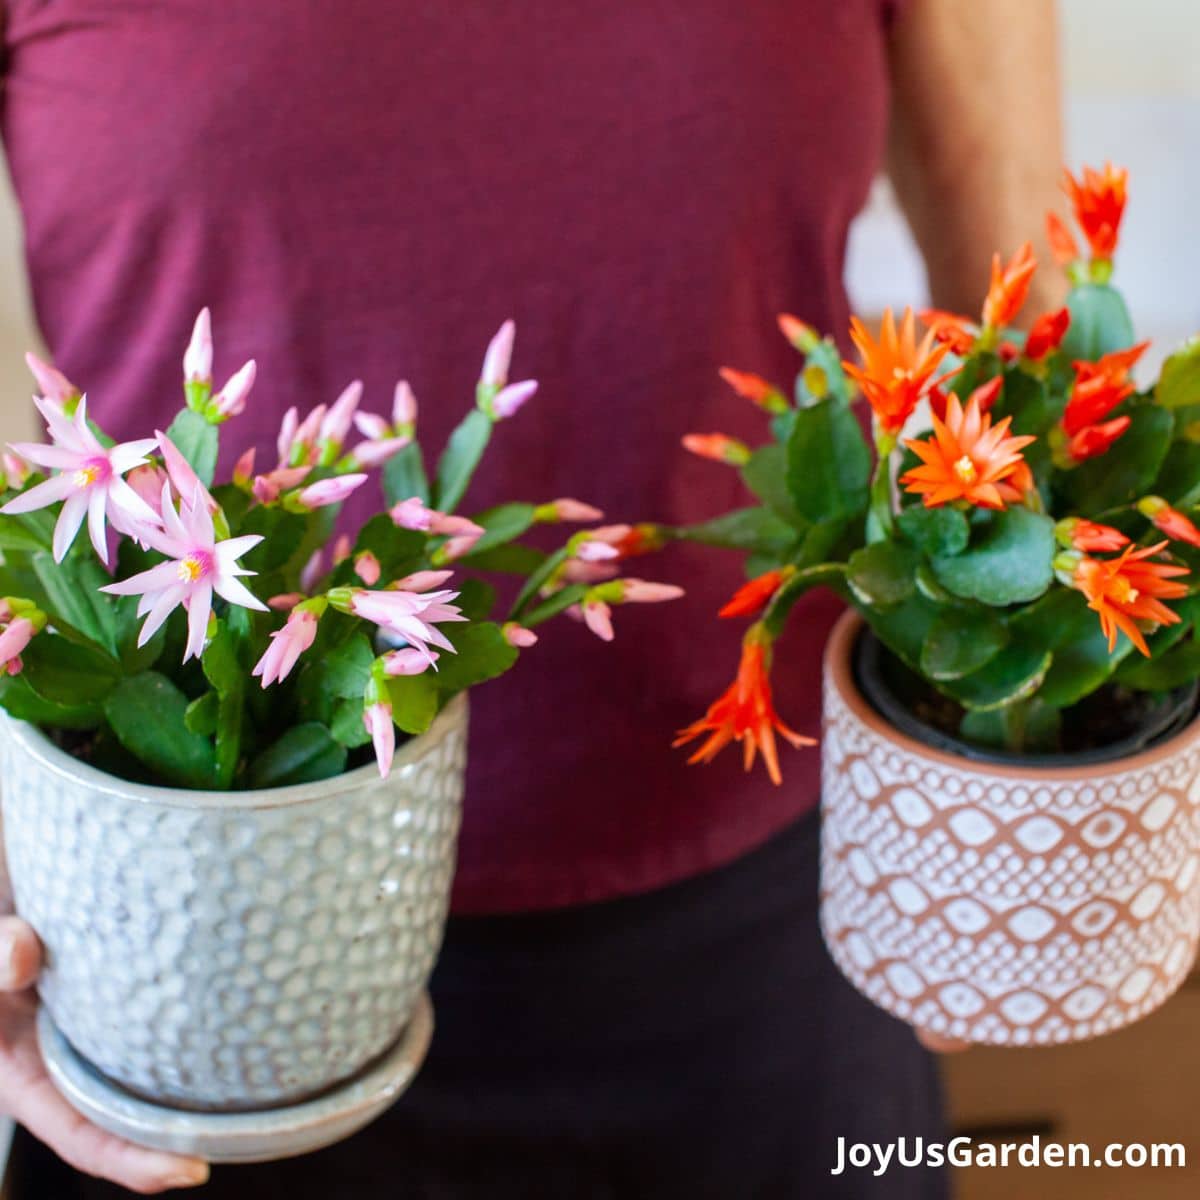 Nell Foster holding 2 easter cactus in pots. Left bloom is prink right bloom is orange. 